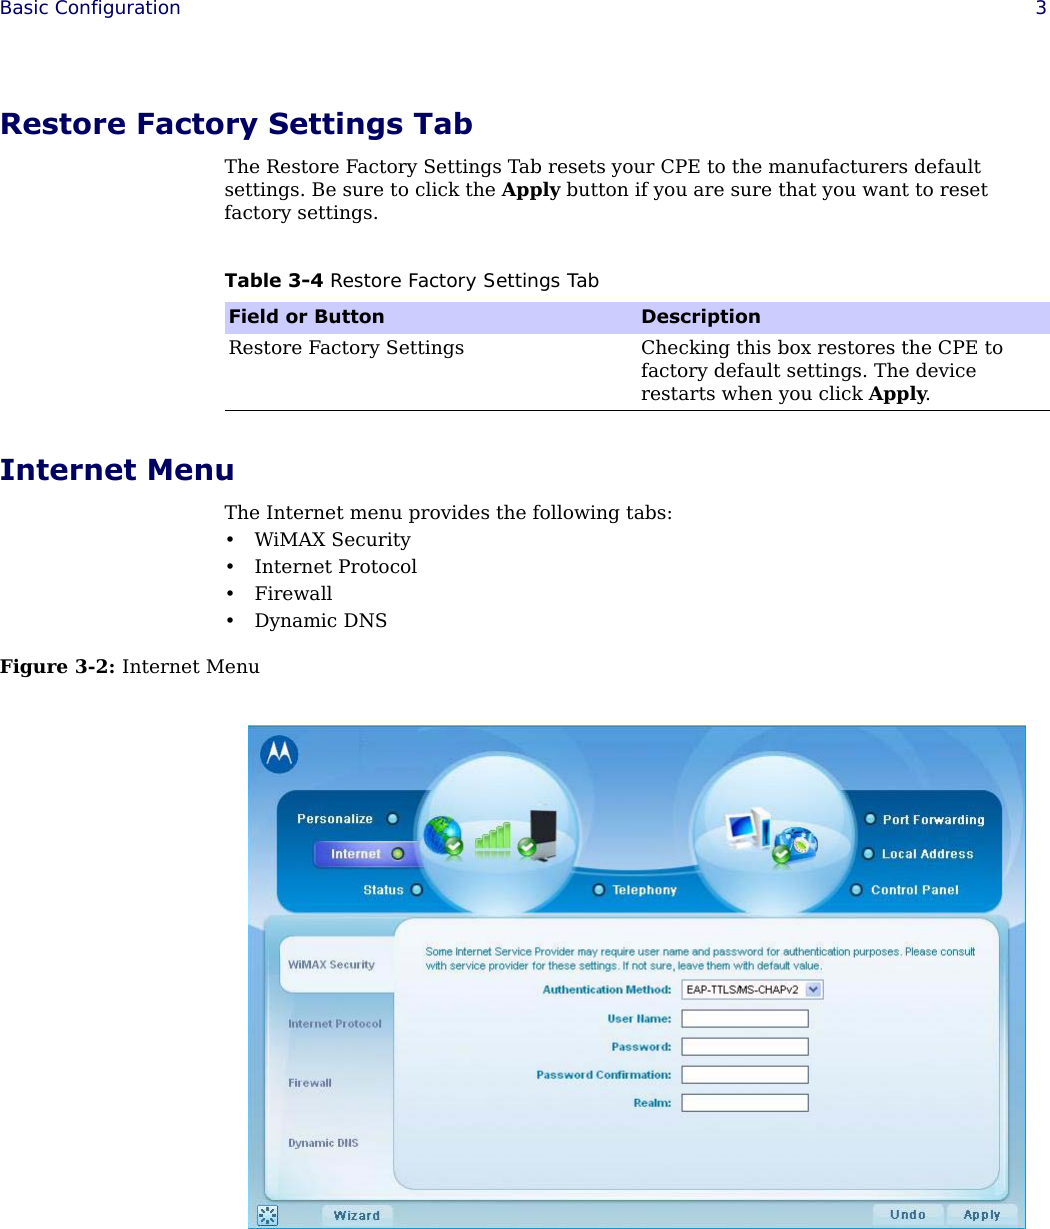  Basic Configuration 3Restore Factory Settings TabThe Restore Factory Settings Tab resets your CPE to the manufacturers default settings. Be sure to click the Apply button if you are sure that you want to reset factory settings.Internet MenuThe Internet menu provides the following tabs:•WiMAX Security• Internet Protocol•Firewall•Dynamic DNSFigure 3-2: Internet MenuTable 3-4 Restore Factory Settings TabField or Button DescriptionRestore Factory Settings Checking this box restores the CPE to factory default settings. The device restarts when you click Apply.